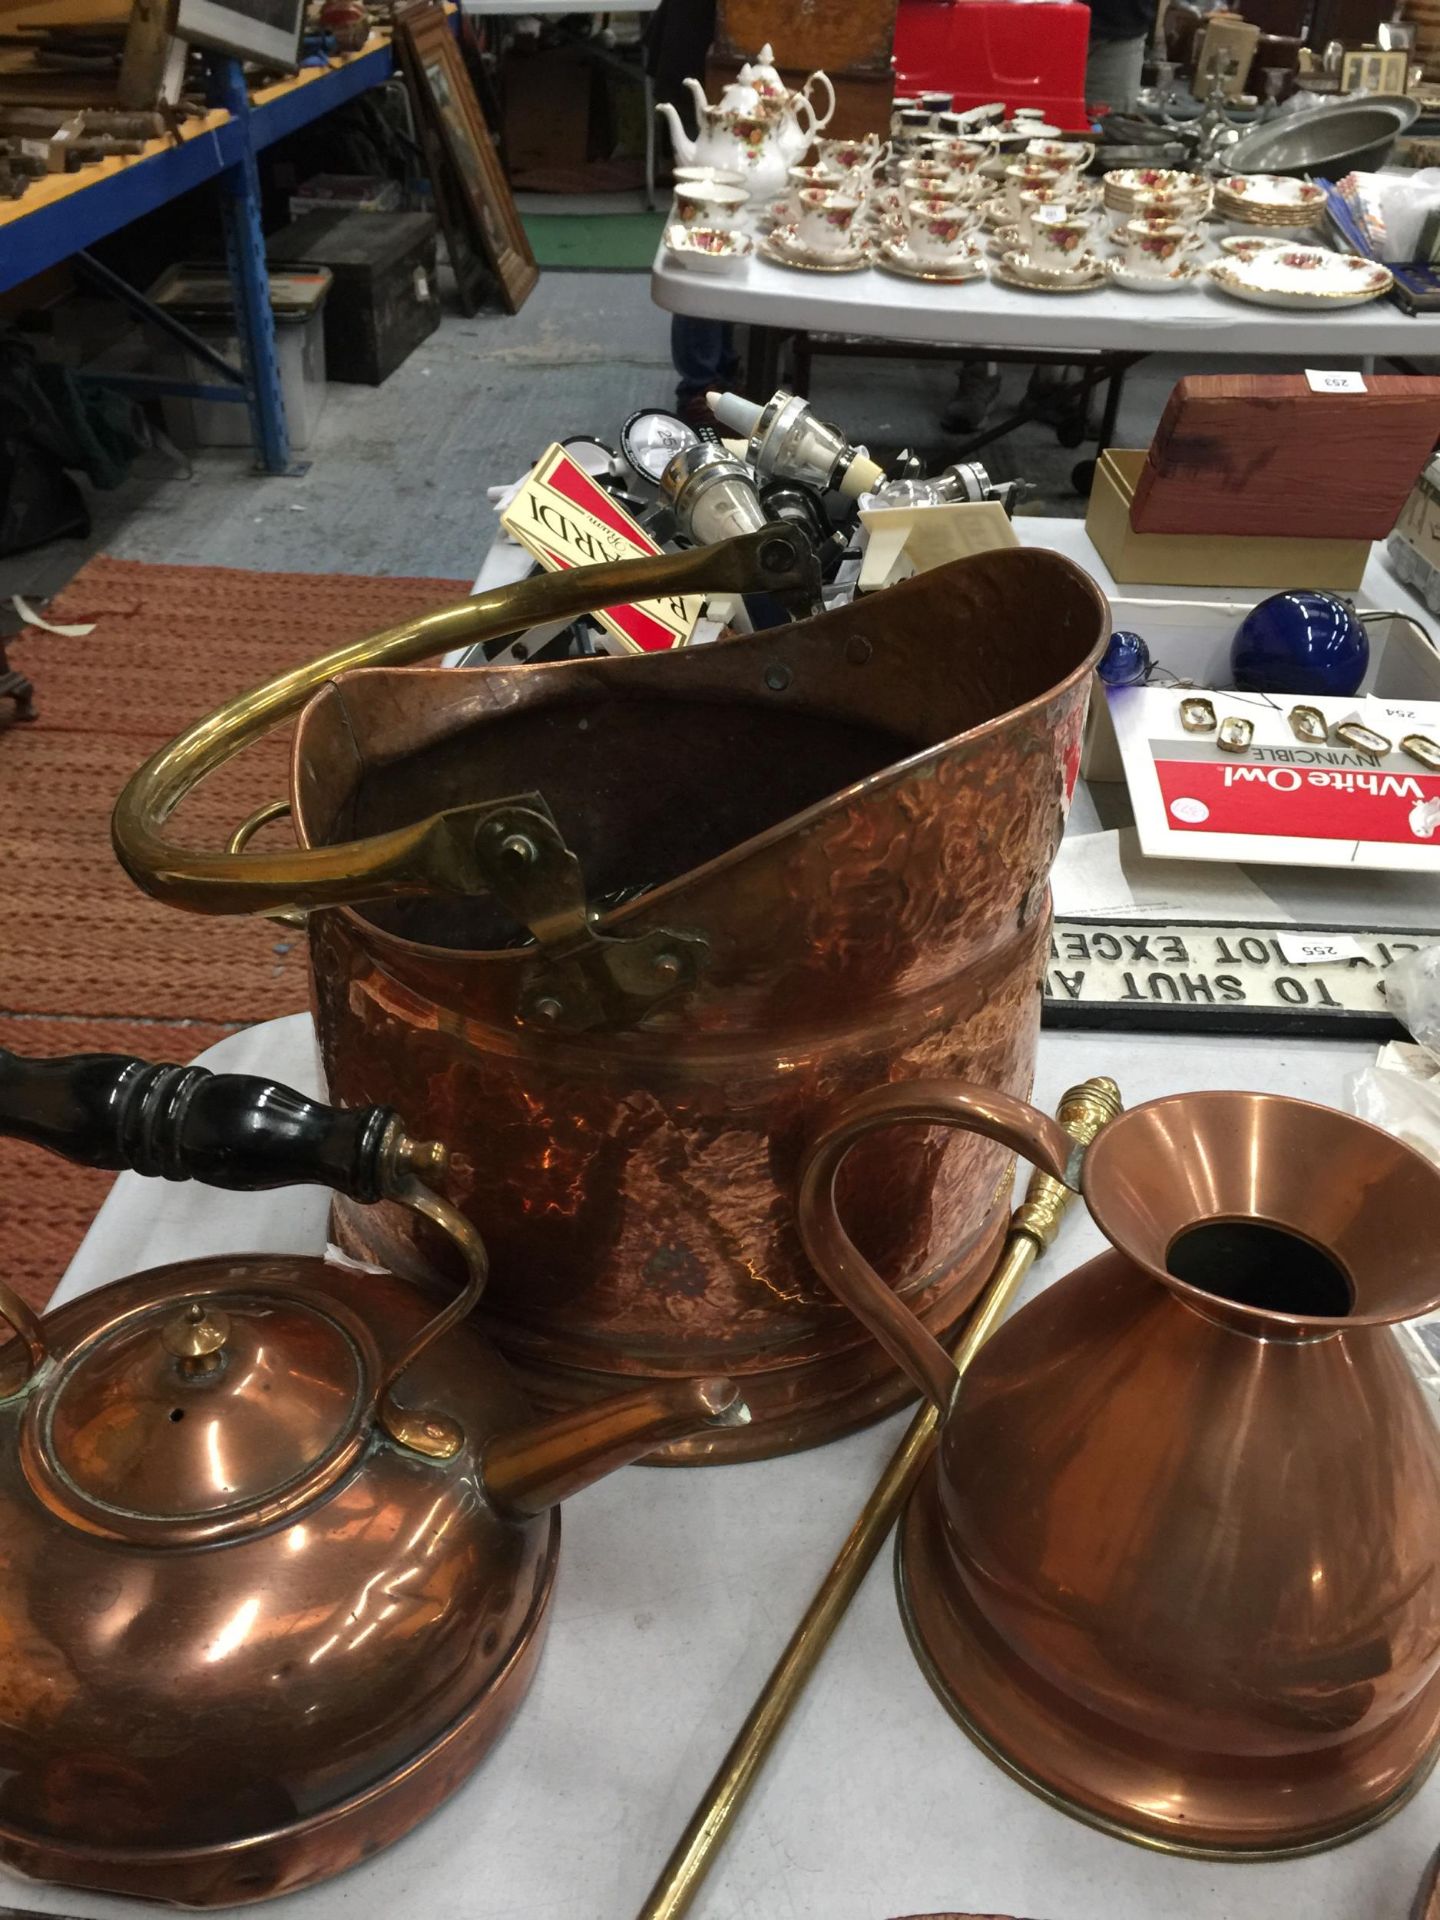 A GROUP OF VINTAGE METALWARES - COPPPER COAL BUCKET, BELLOWS, KETTLE ETC - Image 2 of 3